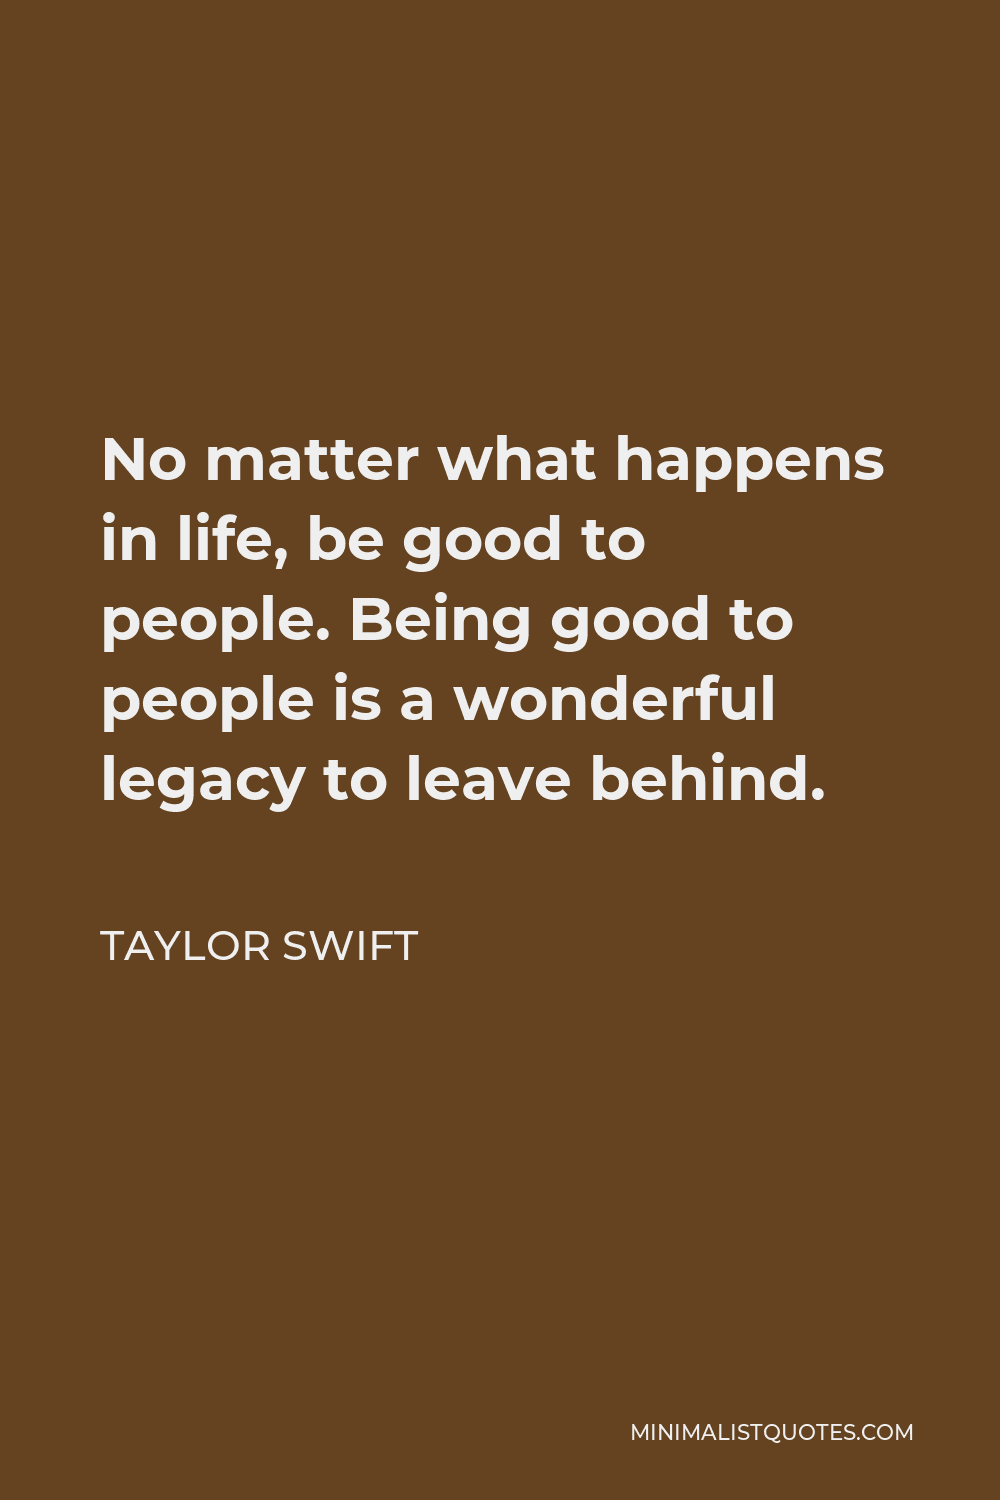 Taylor Swift Quote - No matter what happens in life, be good to people. Being good to people is a wonderful legacy to leave behind.